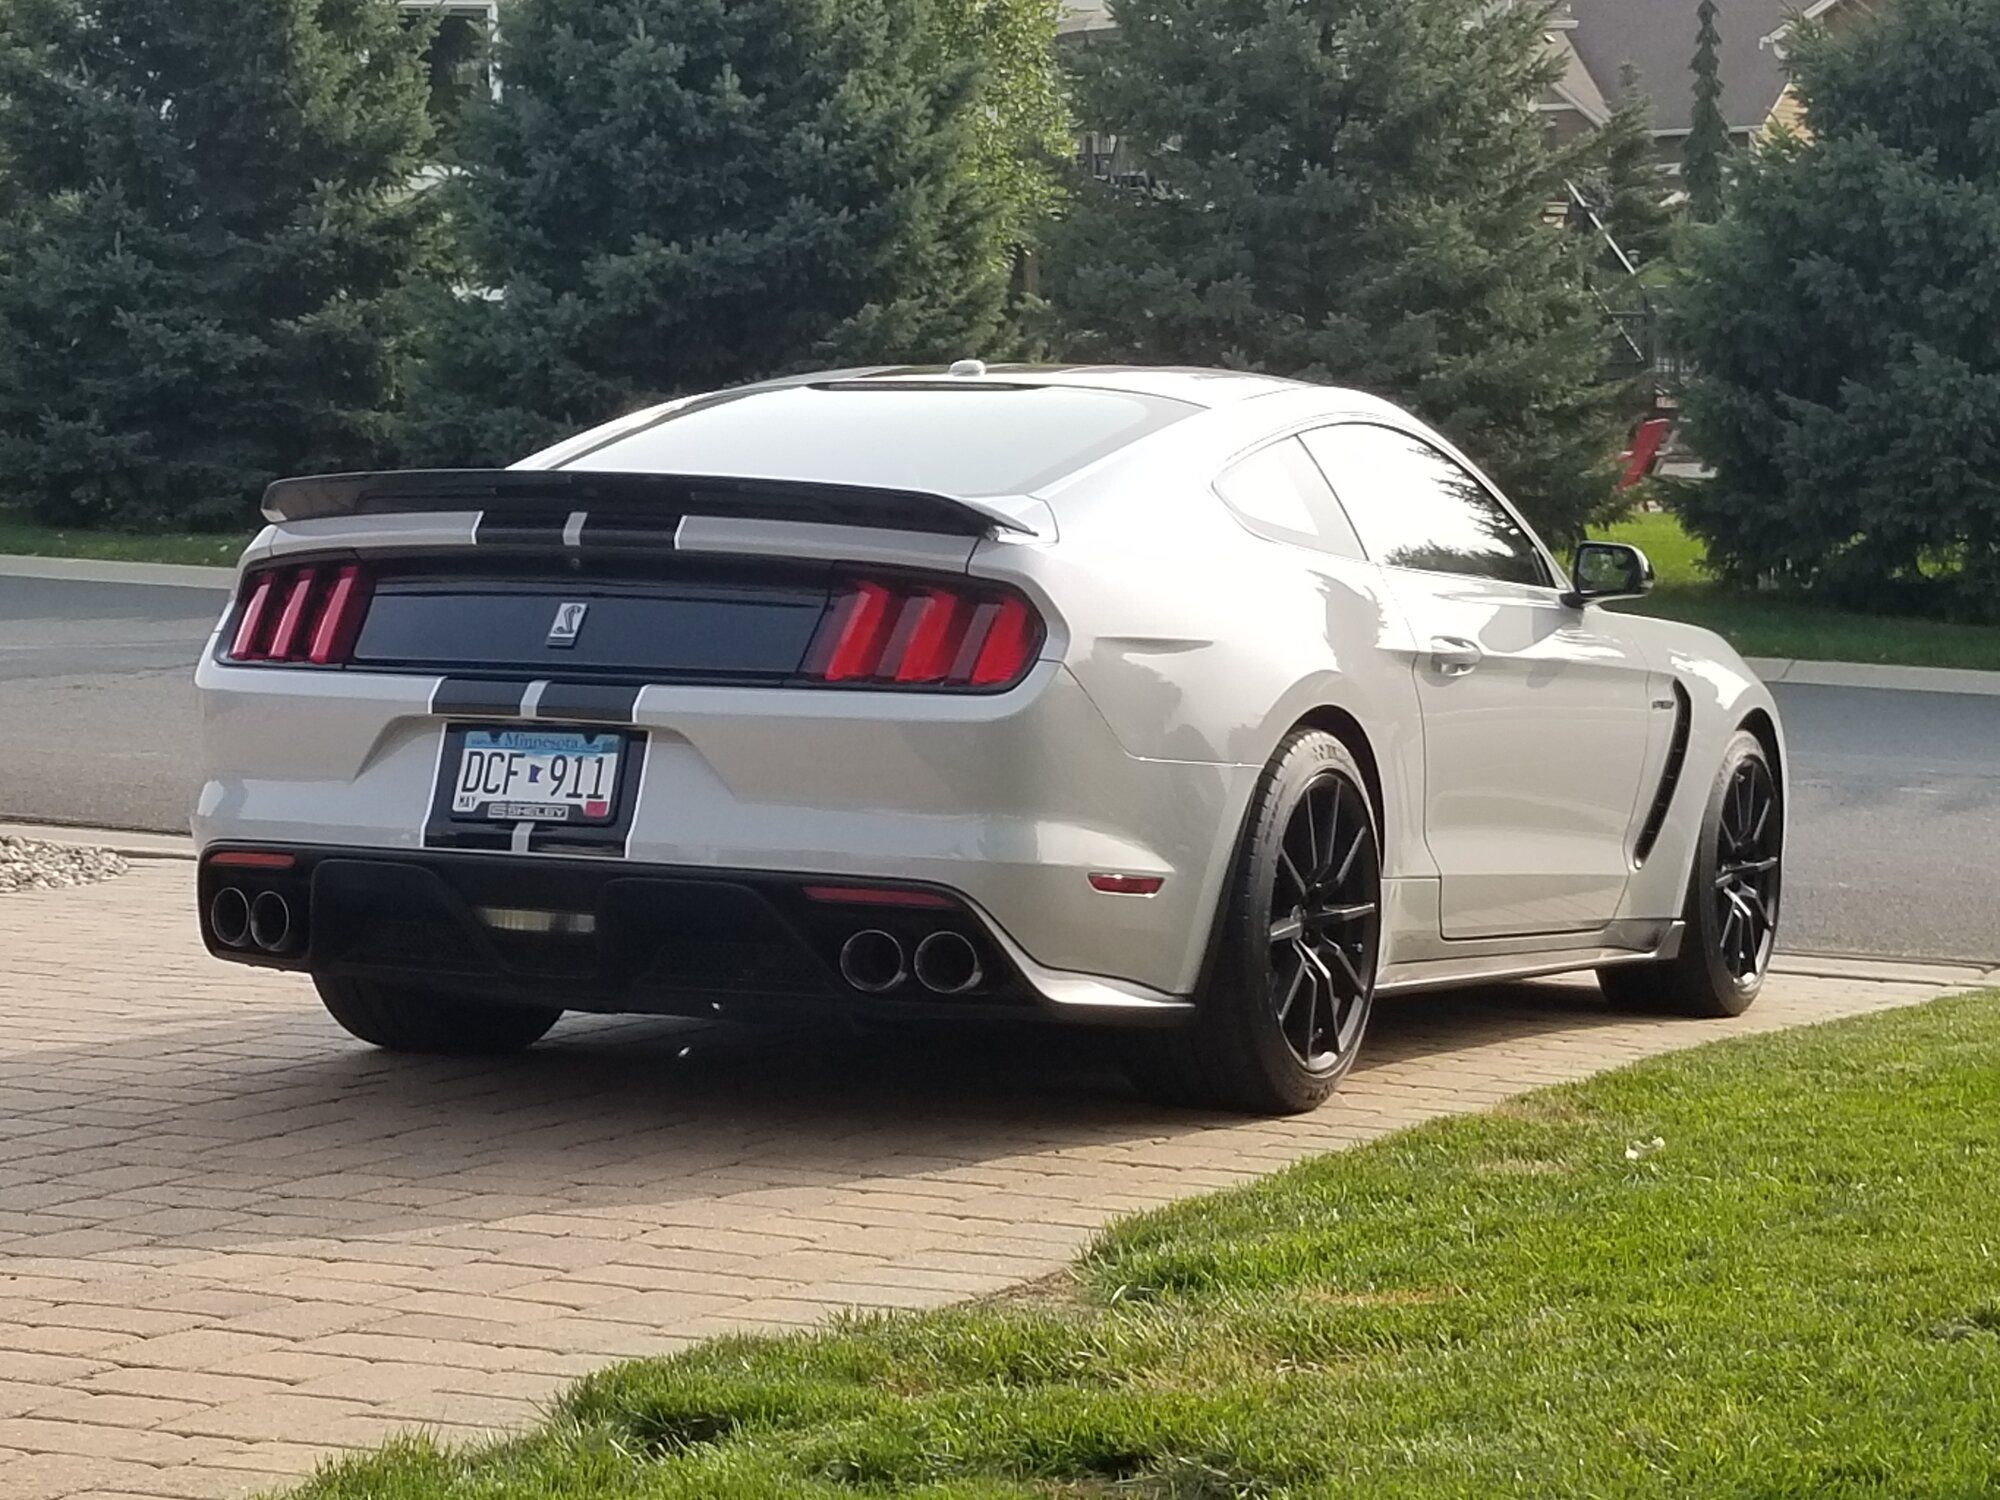 2017 Mustang
GT350 HPDE/Track -  (2017 Avalanche Grey GT350)